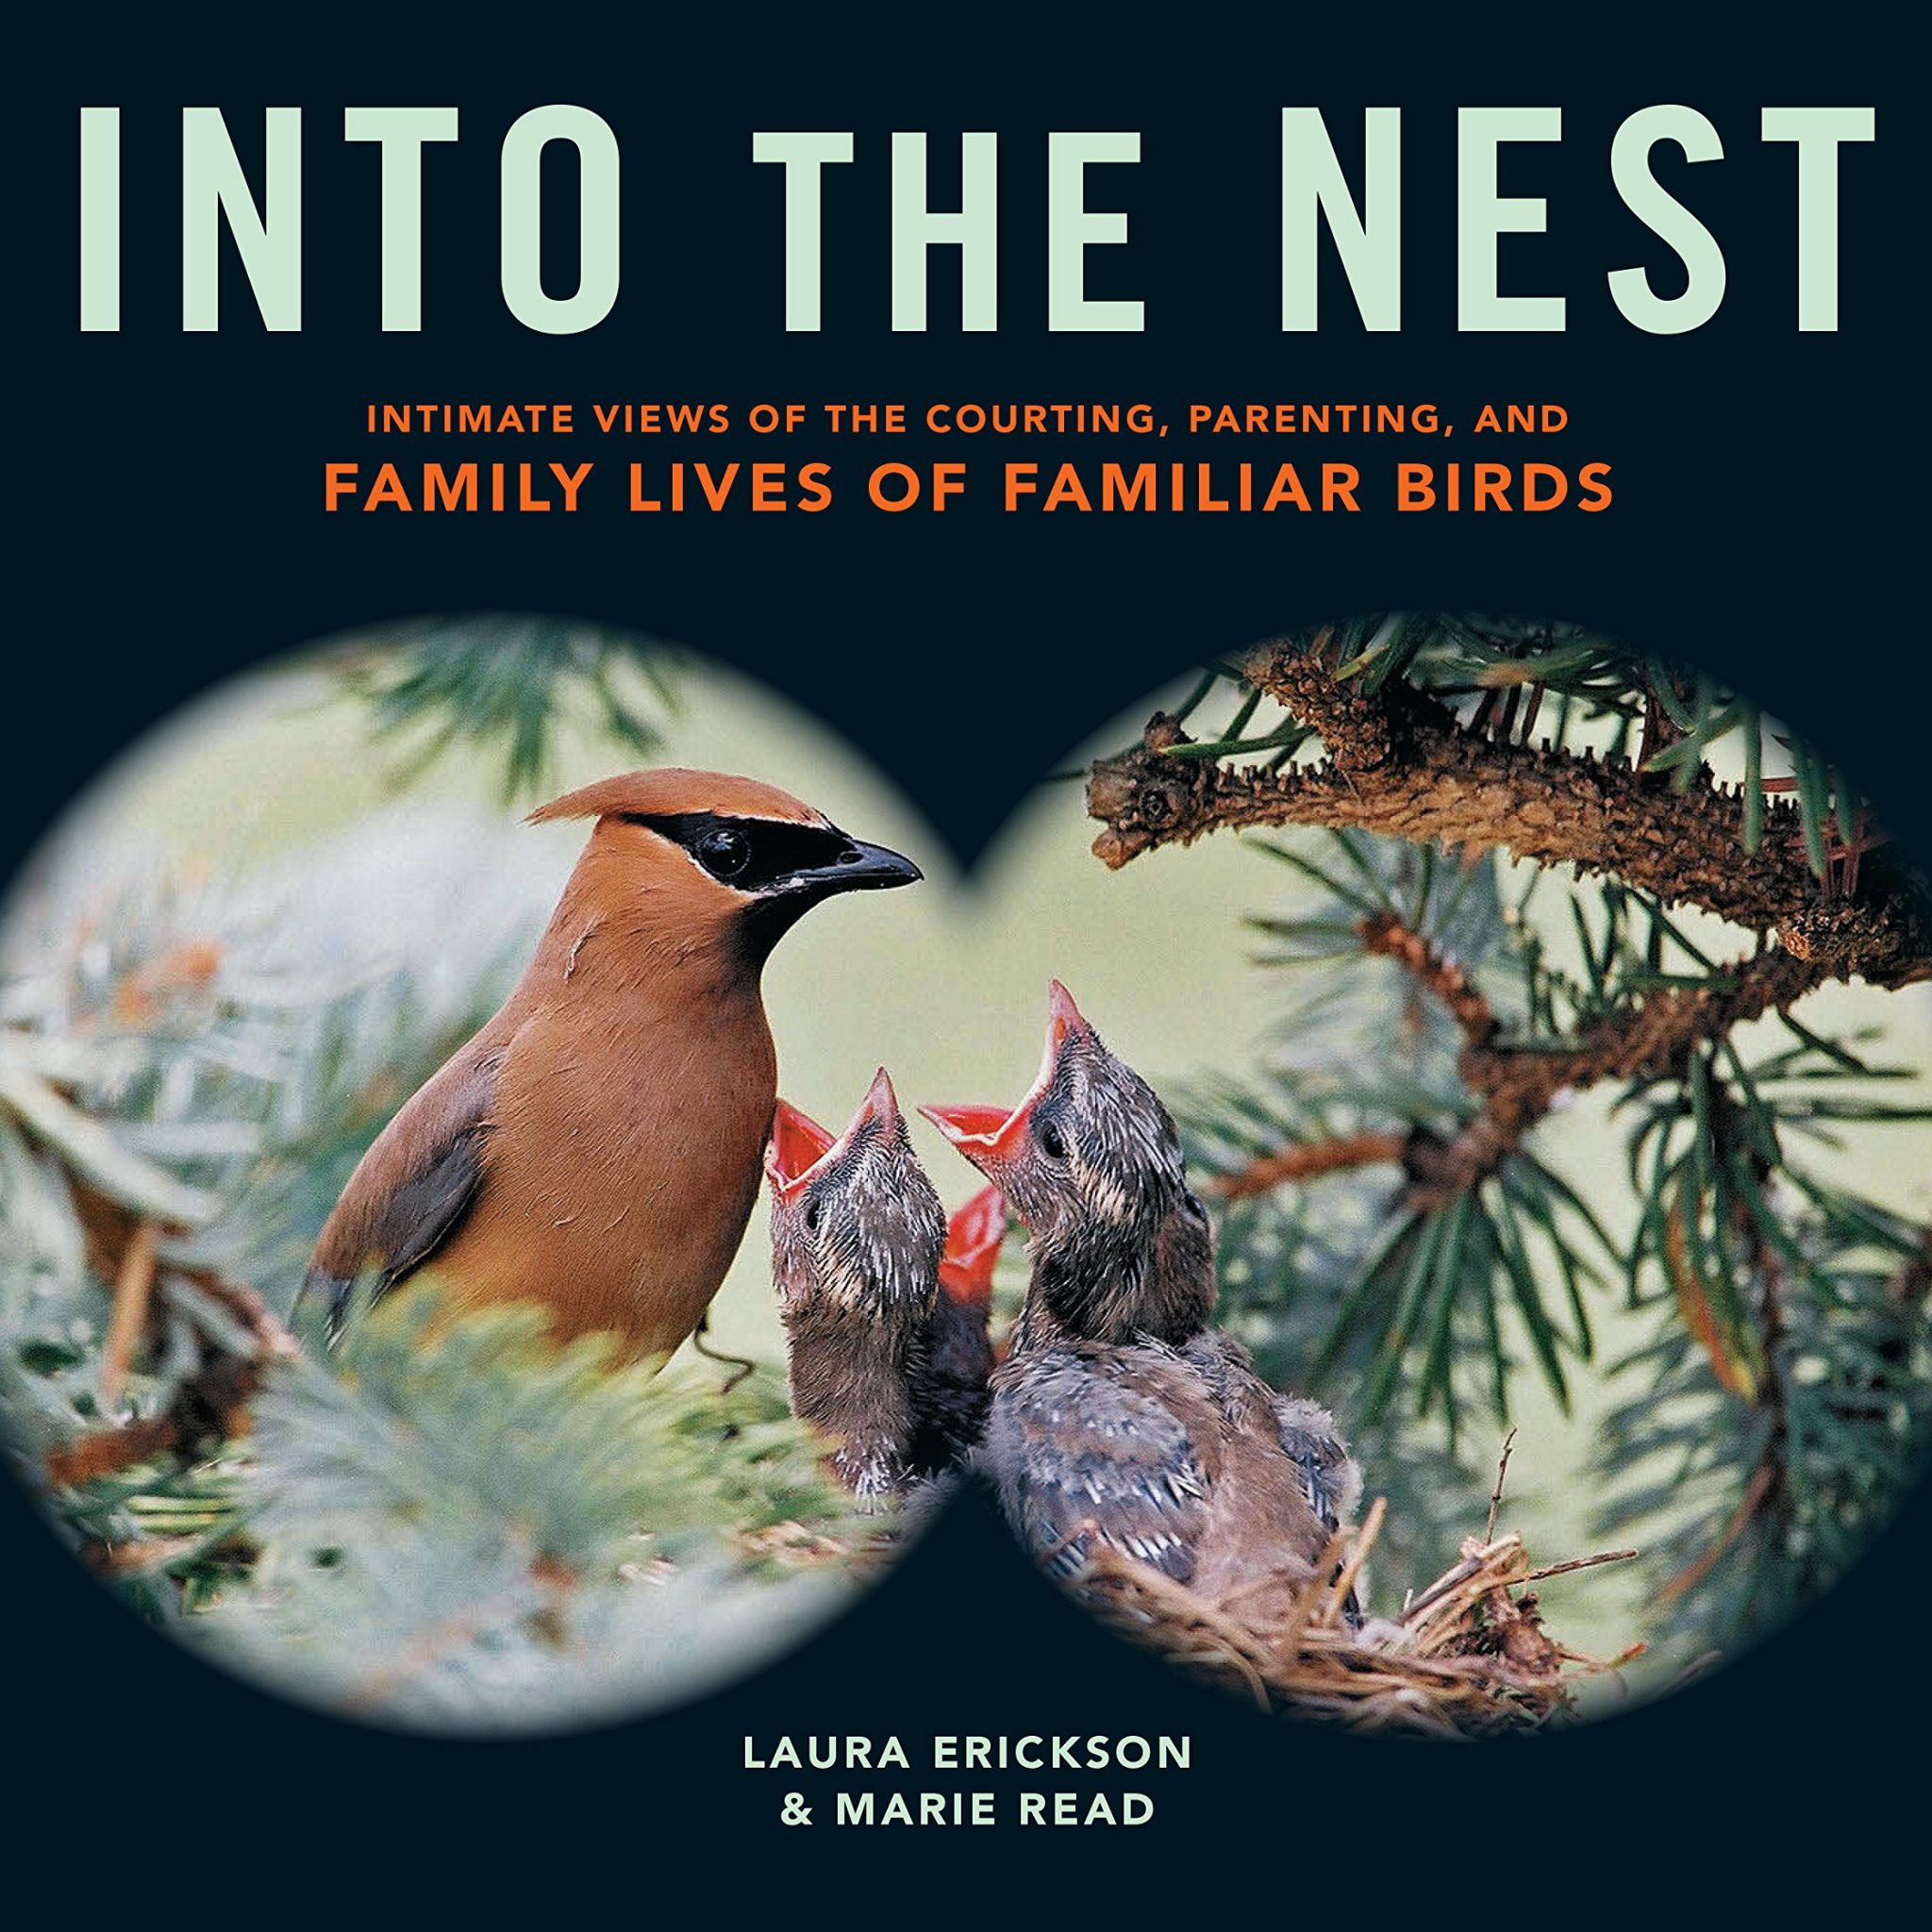 Cover of Into the Nest by Laura Erickson and Marie Read and